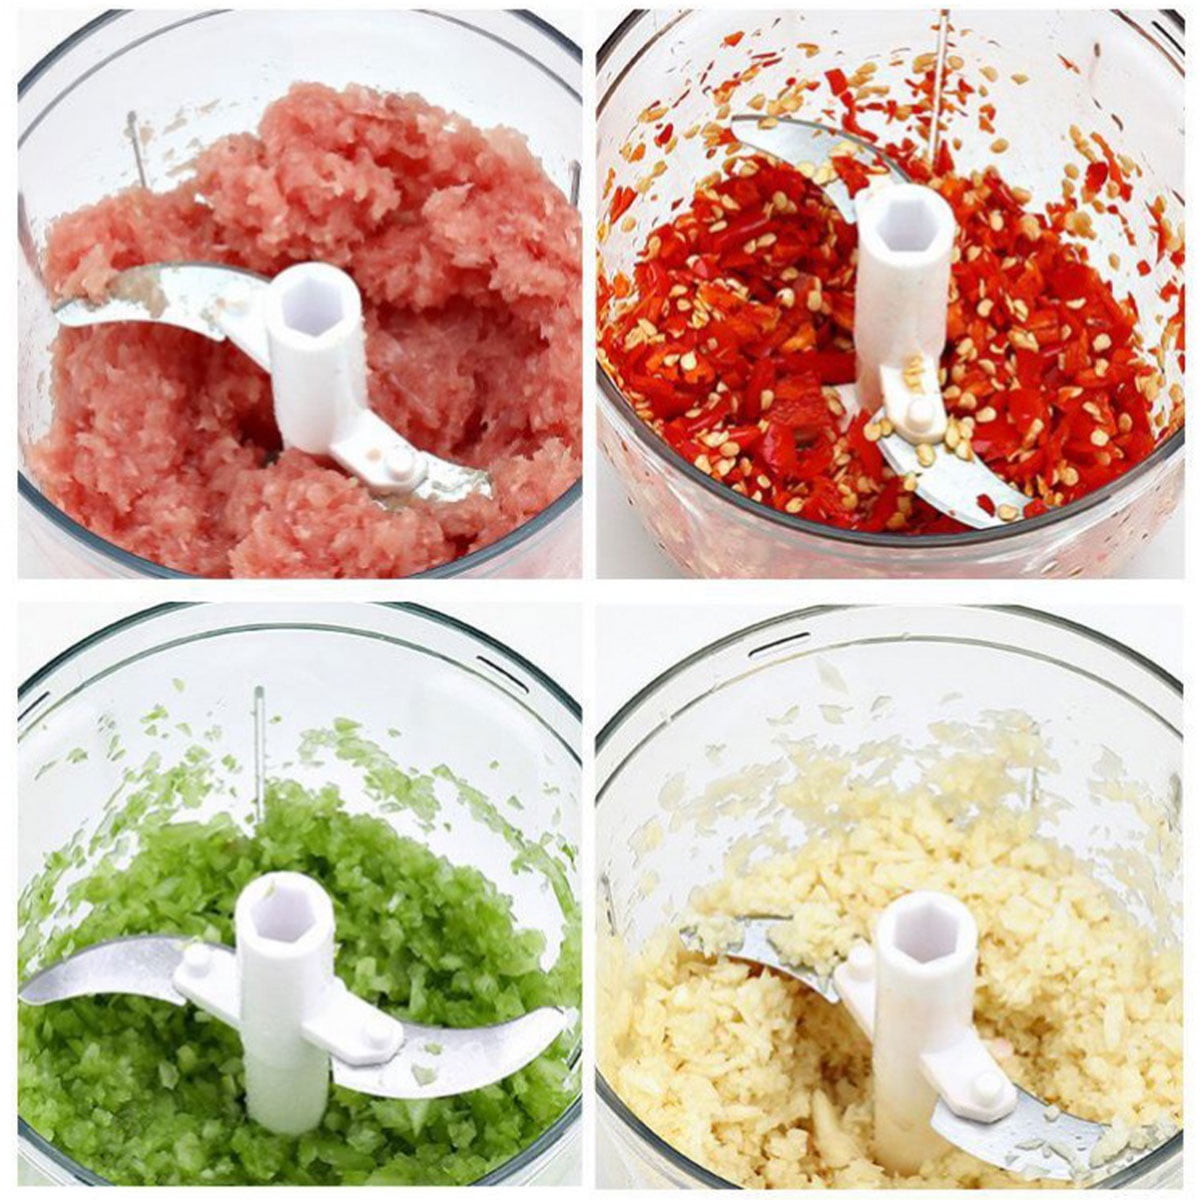  Garlic Chopper, Manual Food Chopper Vegetable Cutter, Chopper  Hand String Vegetable Chopper Onions Cutter for Vegetable Fruits Nuts  Durable Pepper Nuts Ginger Tomato etc. (500ml Green): Home & Kitchen